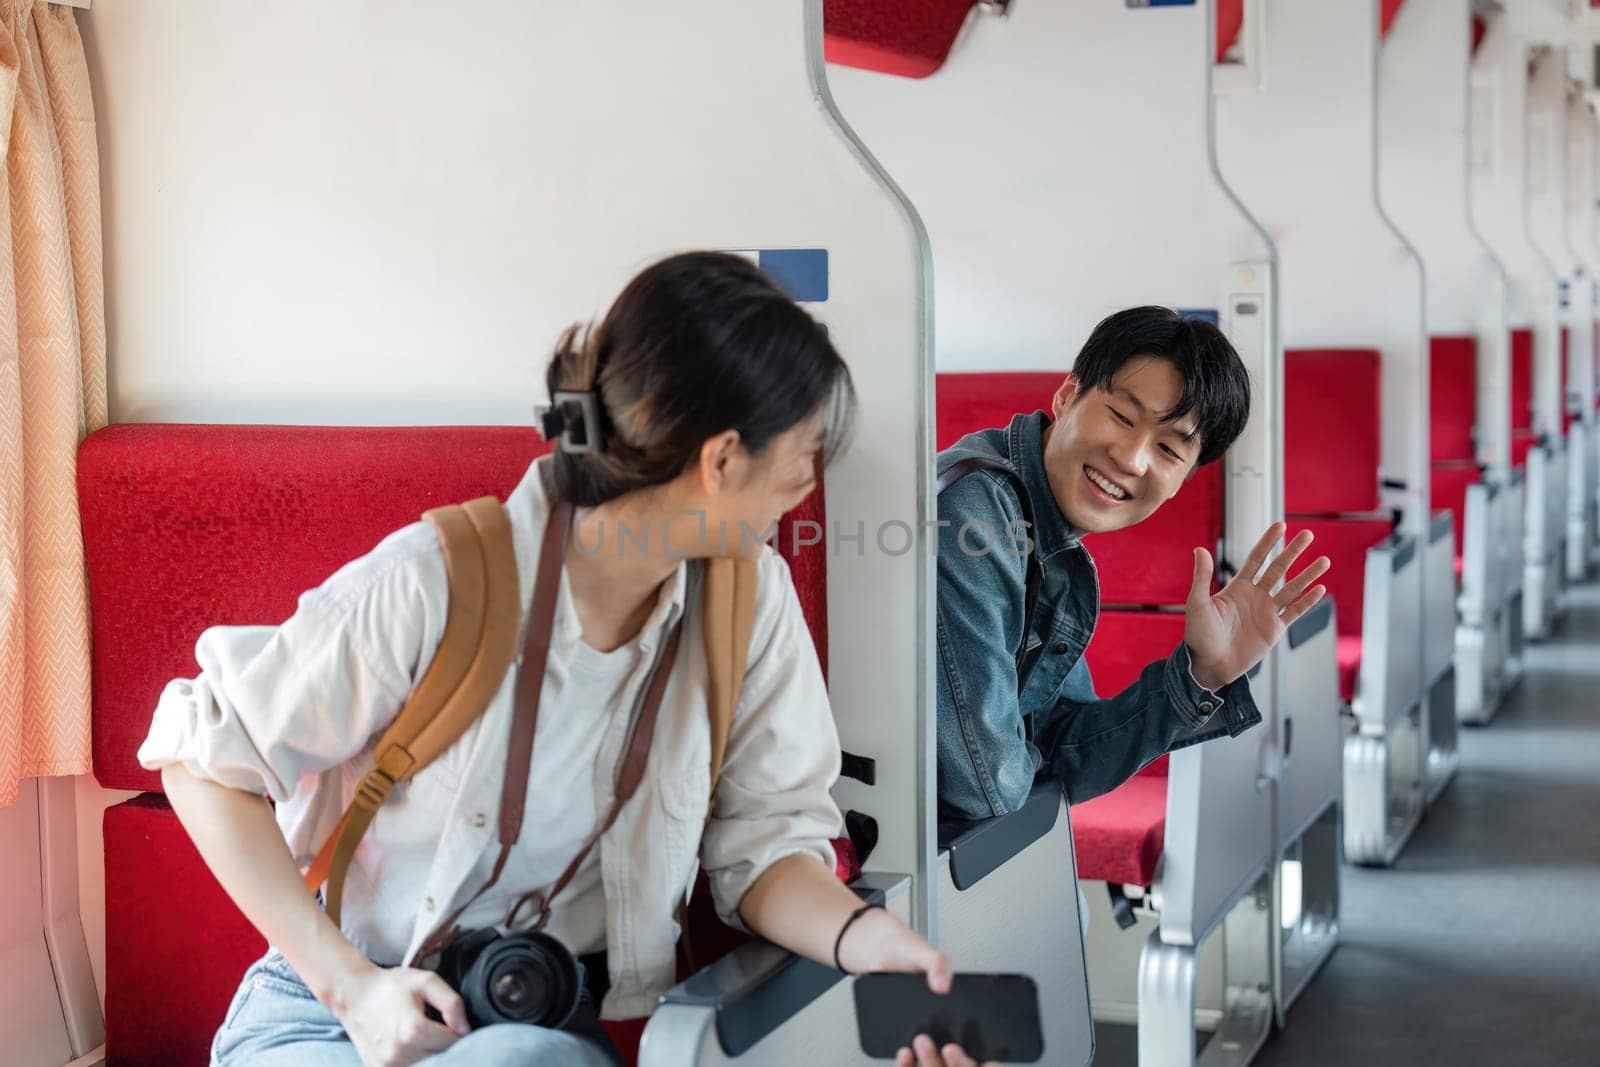 friendly and young Asian male traveler waves his hand, greeting a new friend during the trip on a train. Friendship and traveling concepts.